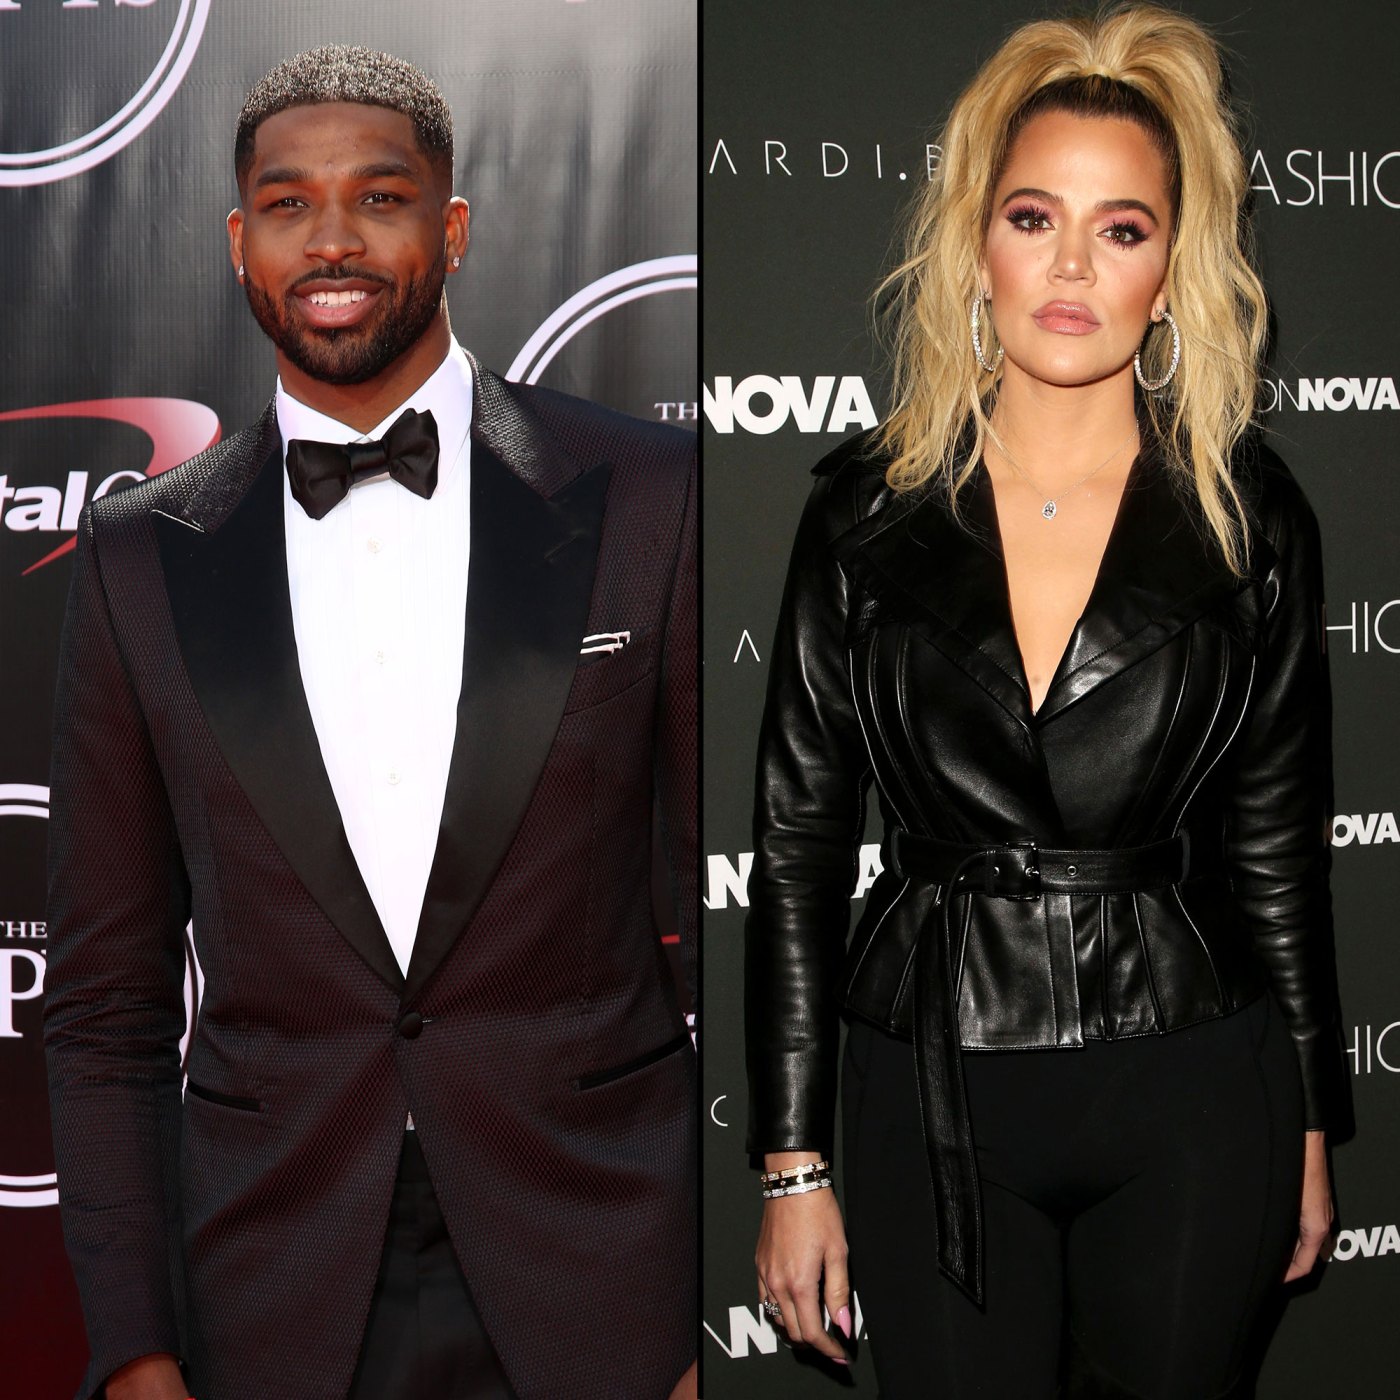 Tristan Thompson Confirms He's the Father of Maralee Nichols' Son